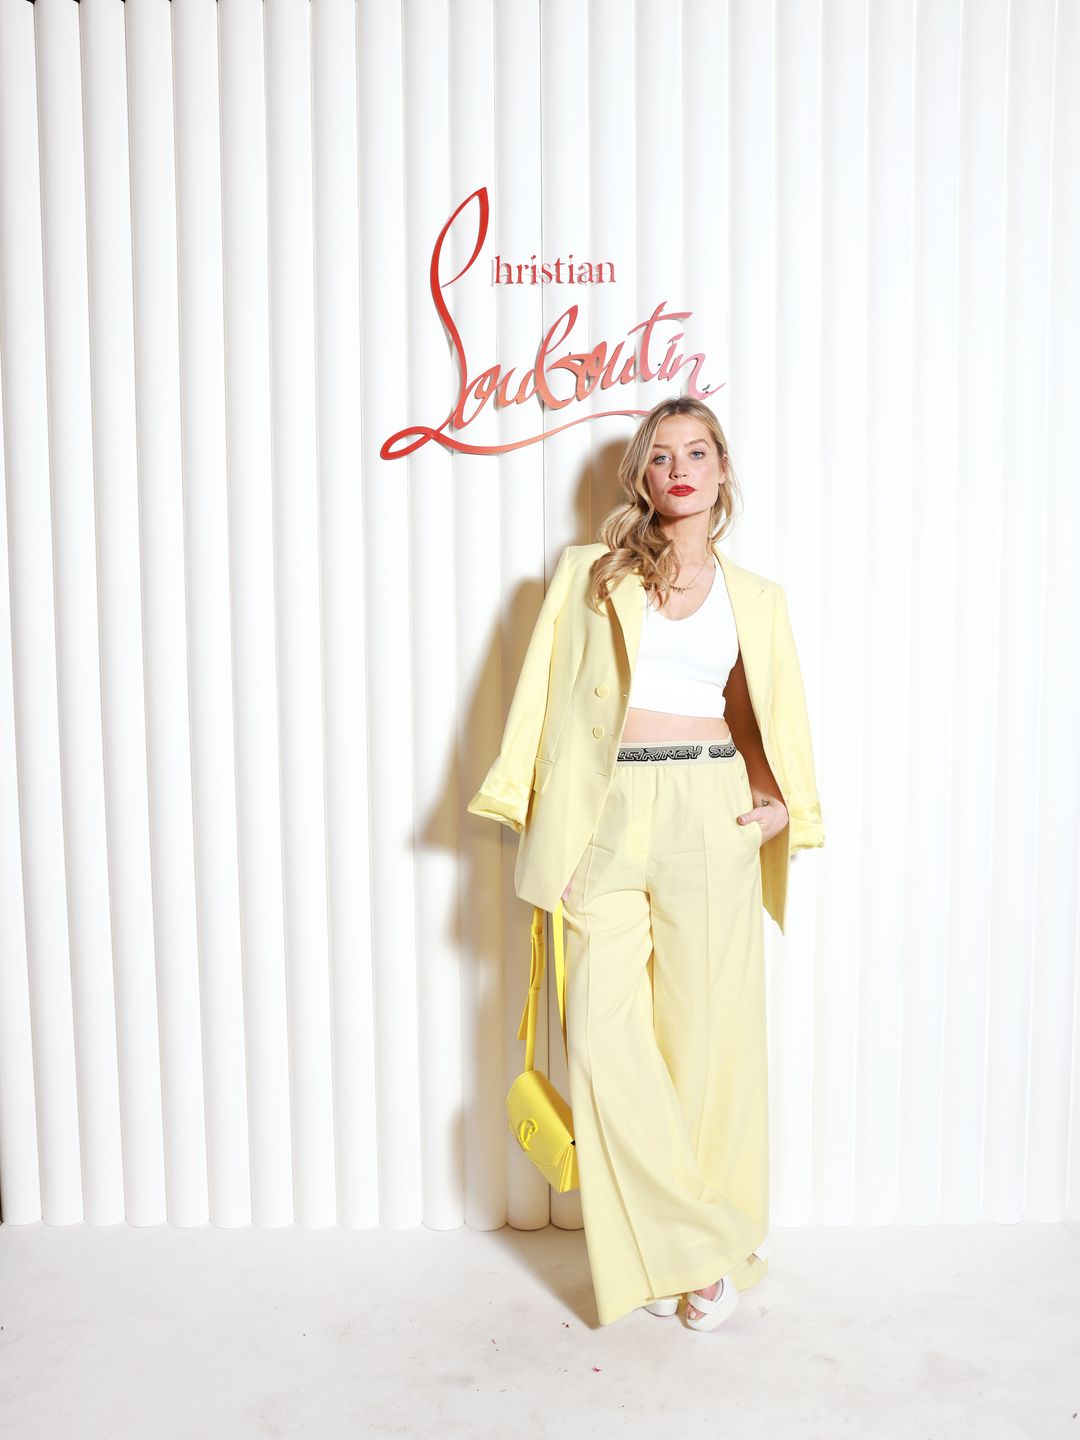 Laura Whitmore attends "The Loubi Show" as part of Paris Fashion Week in a yellow suit